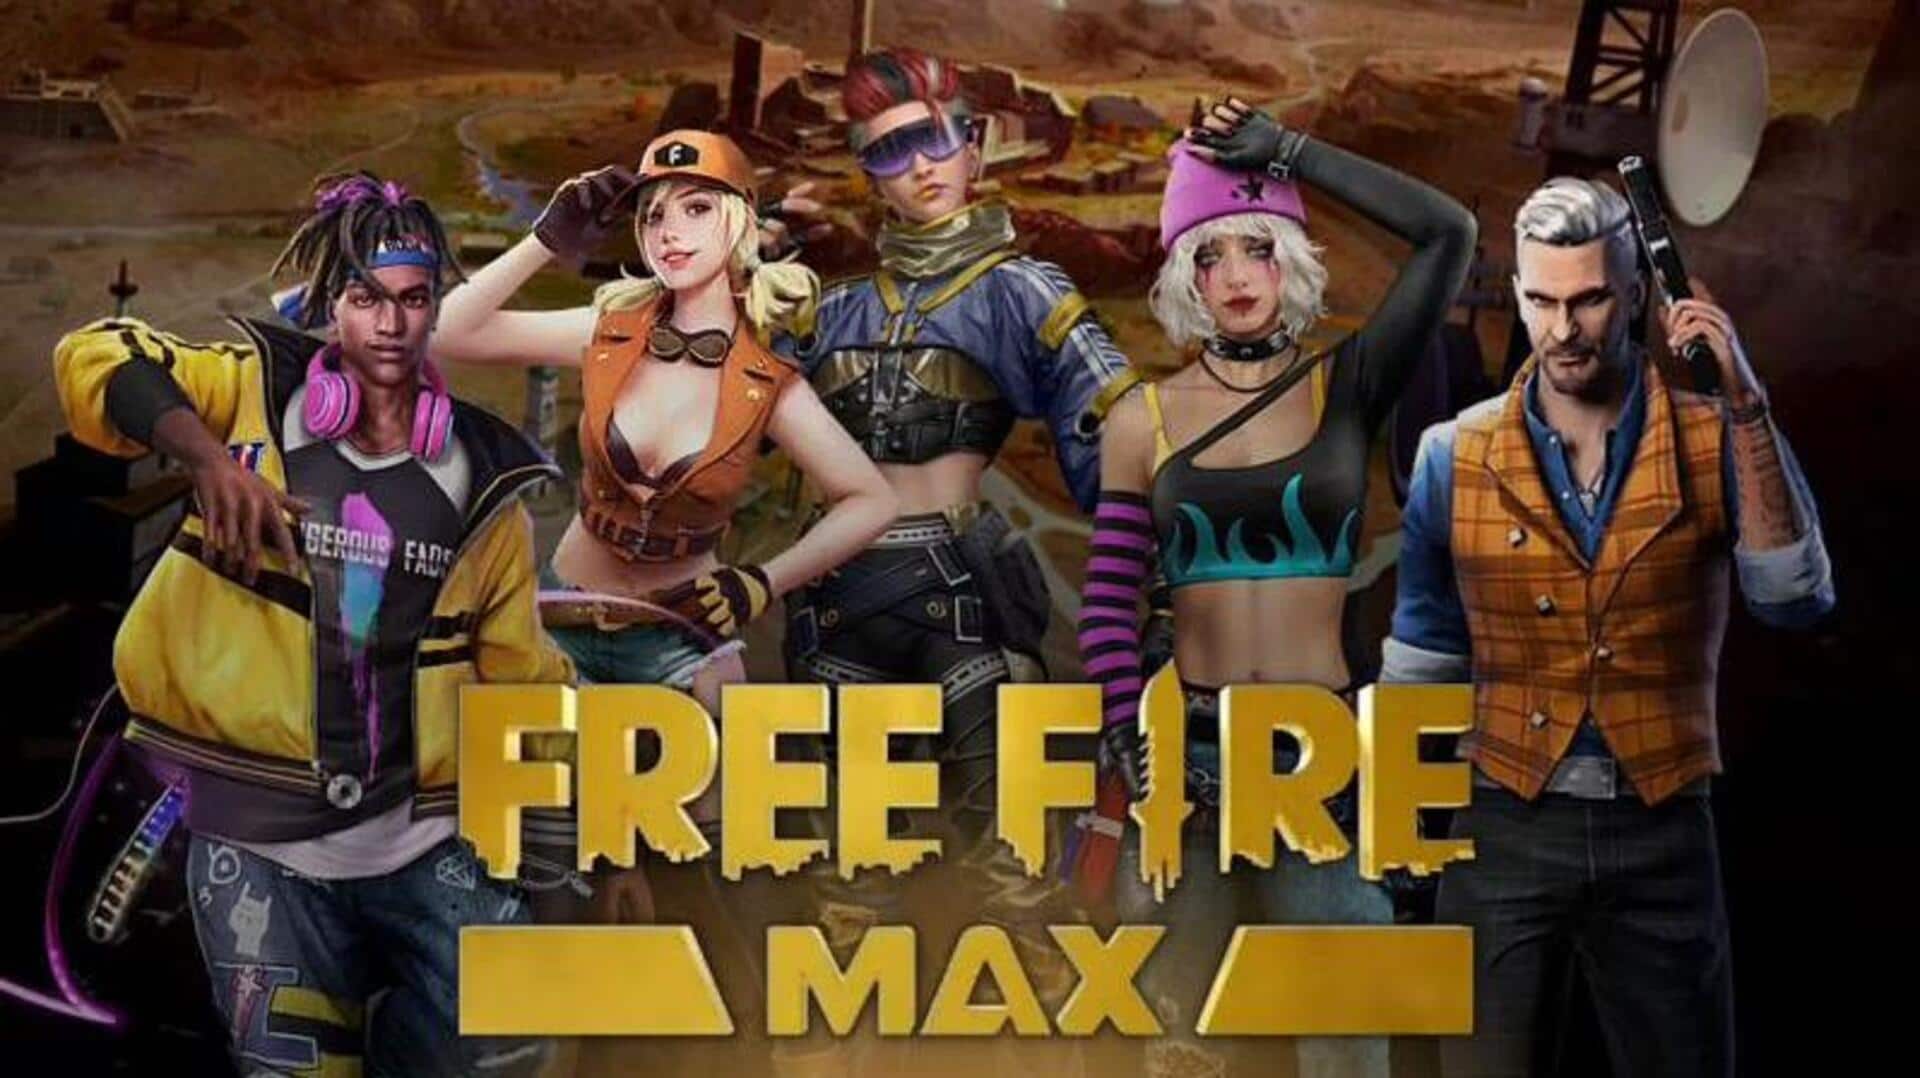 Garena Free Fire MAX battle royale game launched, here is how to